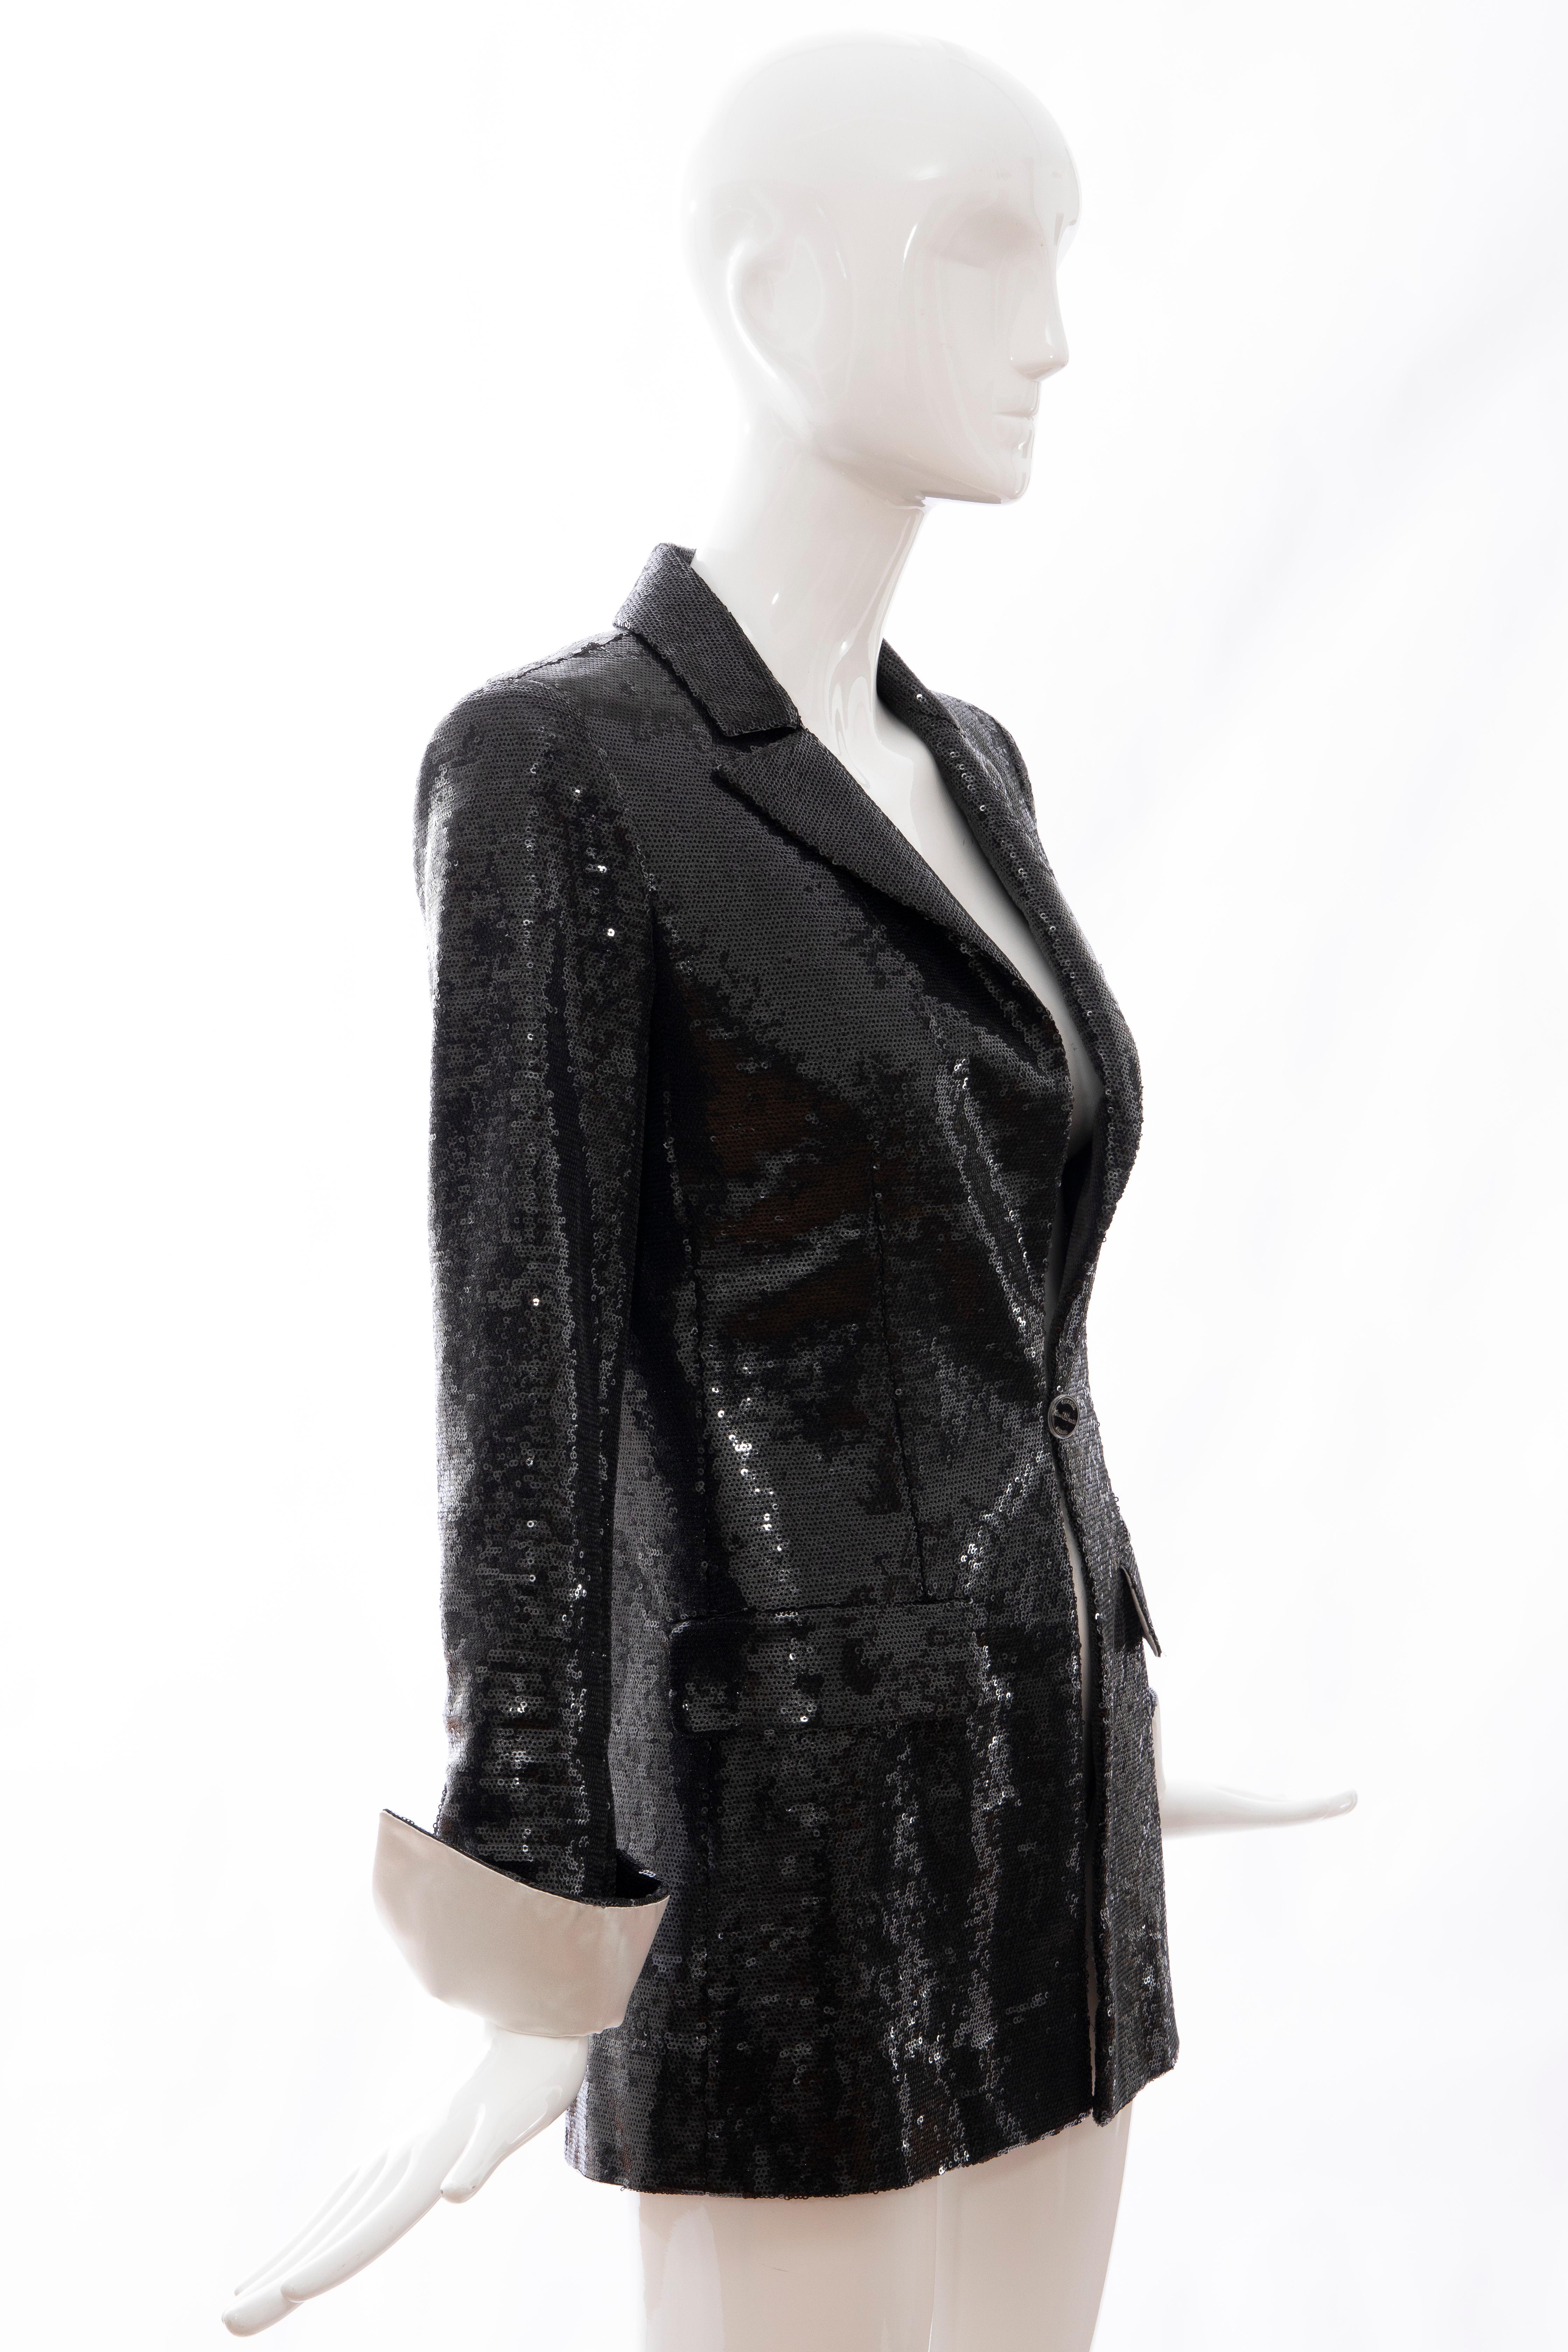 Chanel Black Embroidered Sequin Evening Jacket Ivory Silk Cuffs, Cruise 2009 For Sale 7